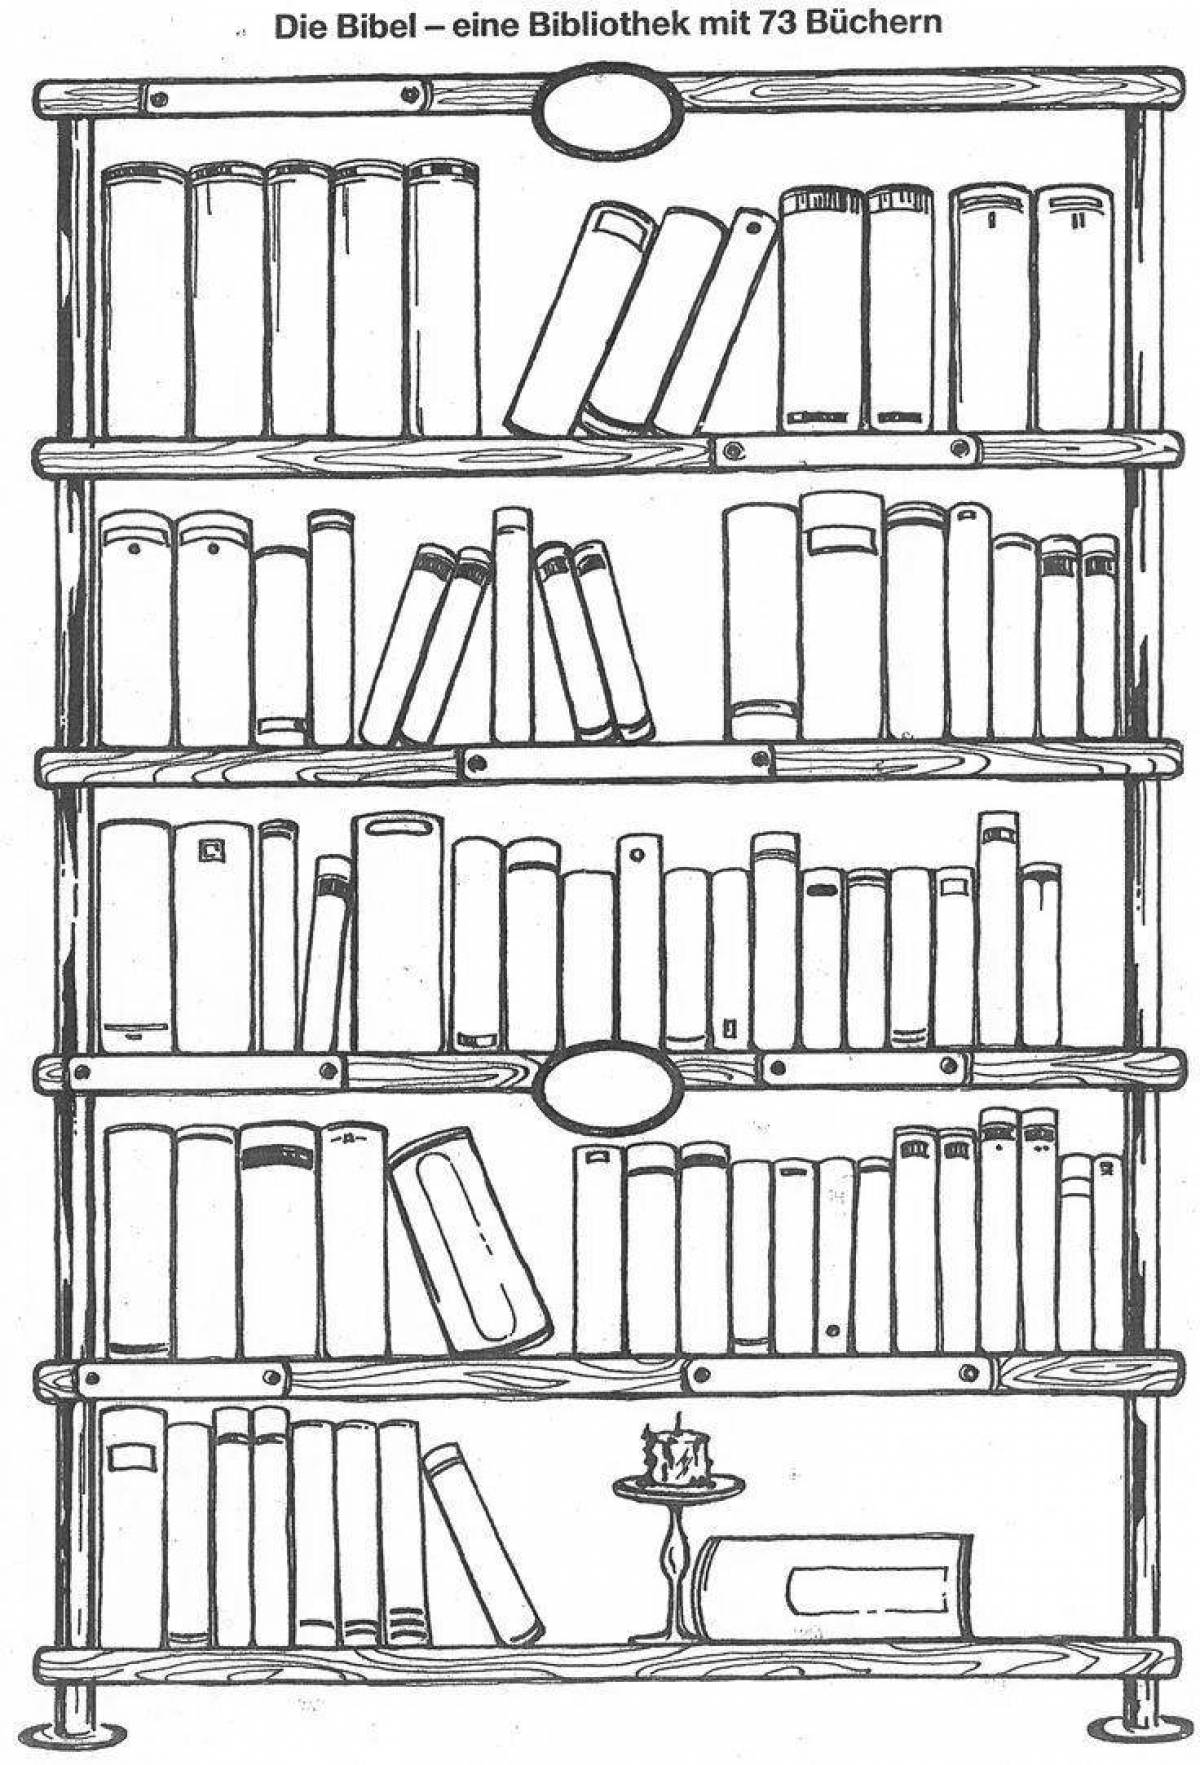 Coloring book unusual shelf with books